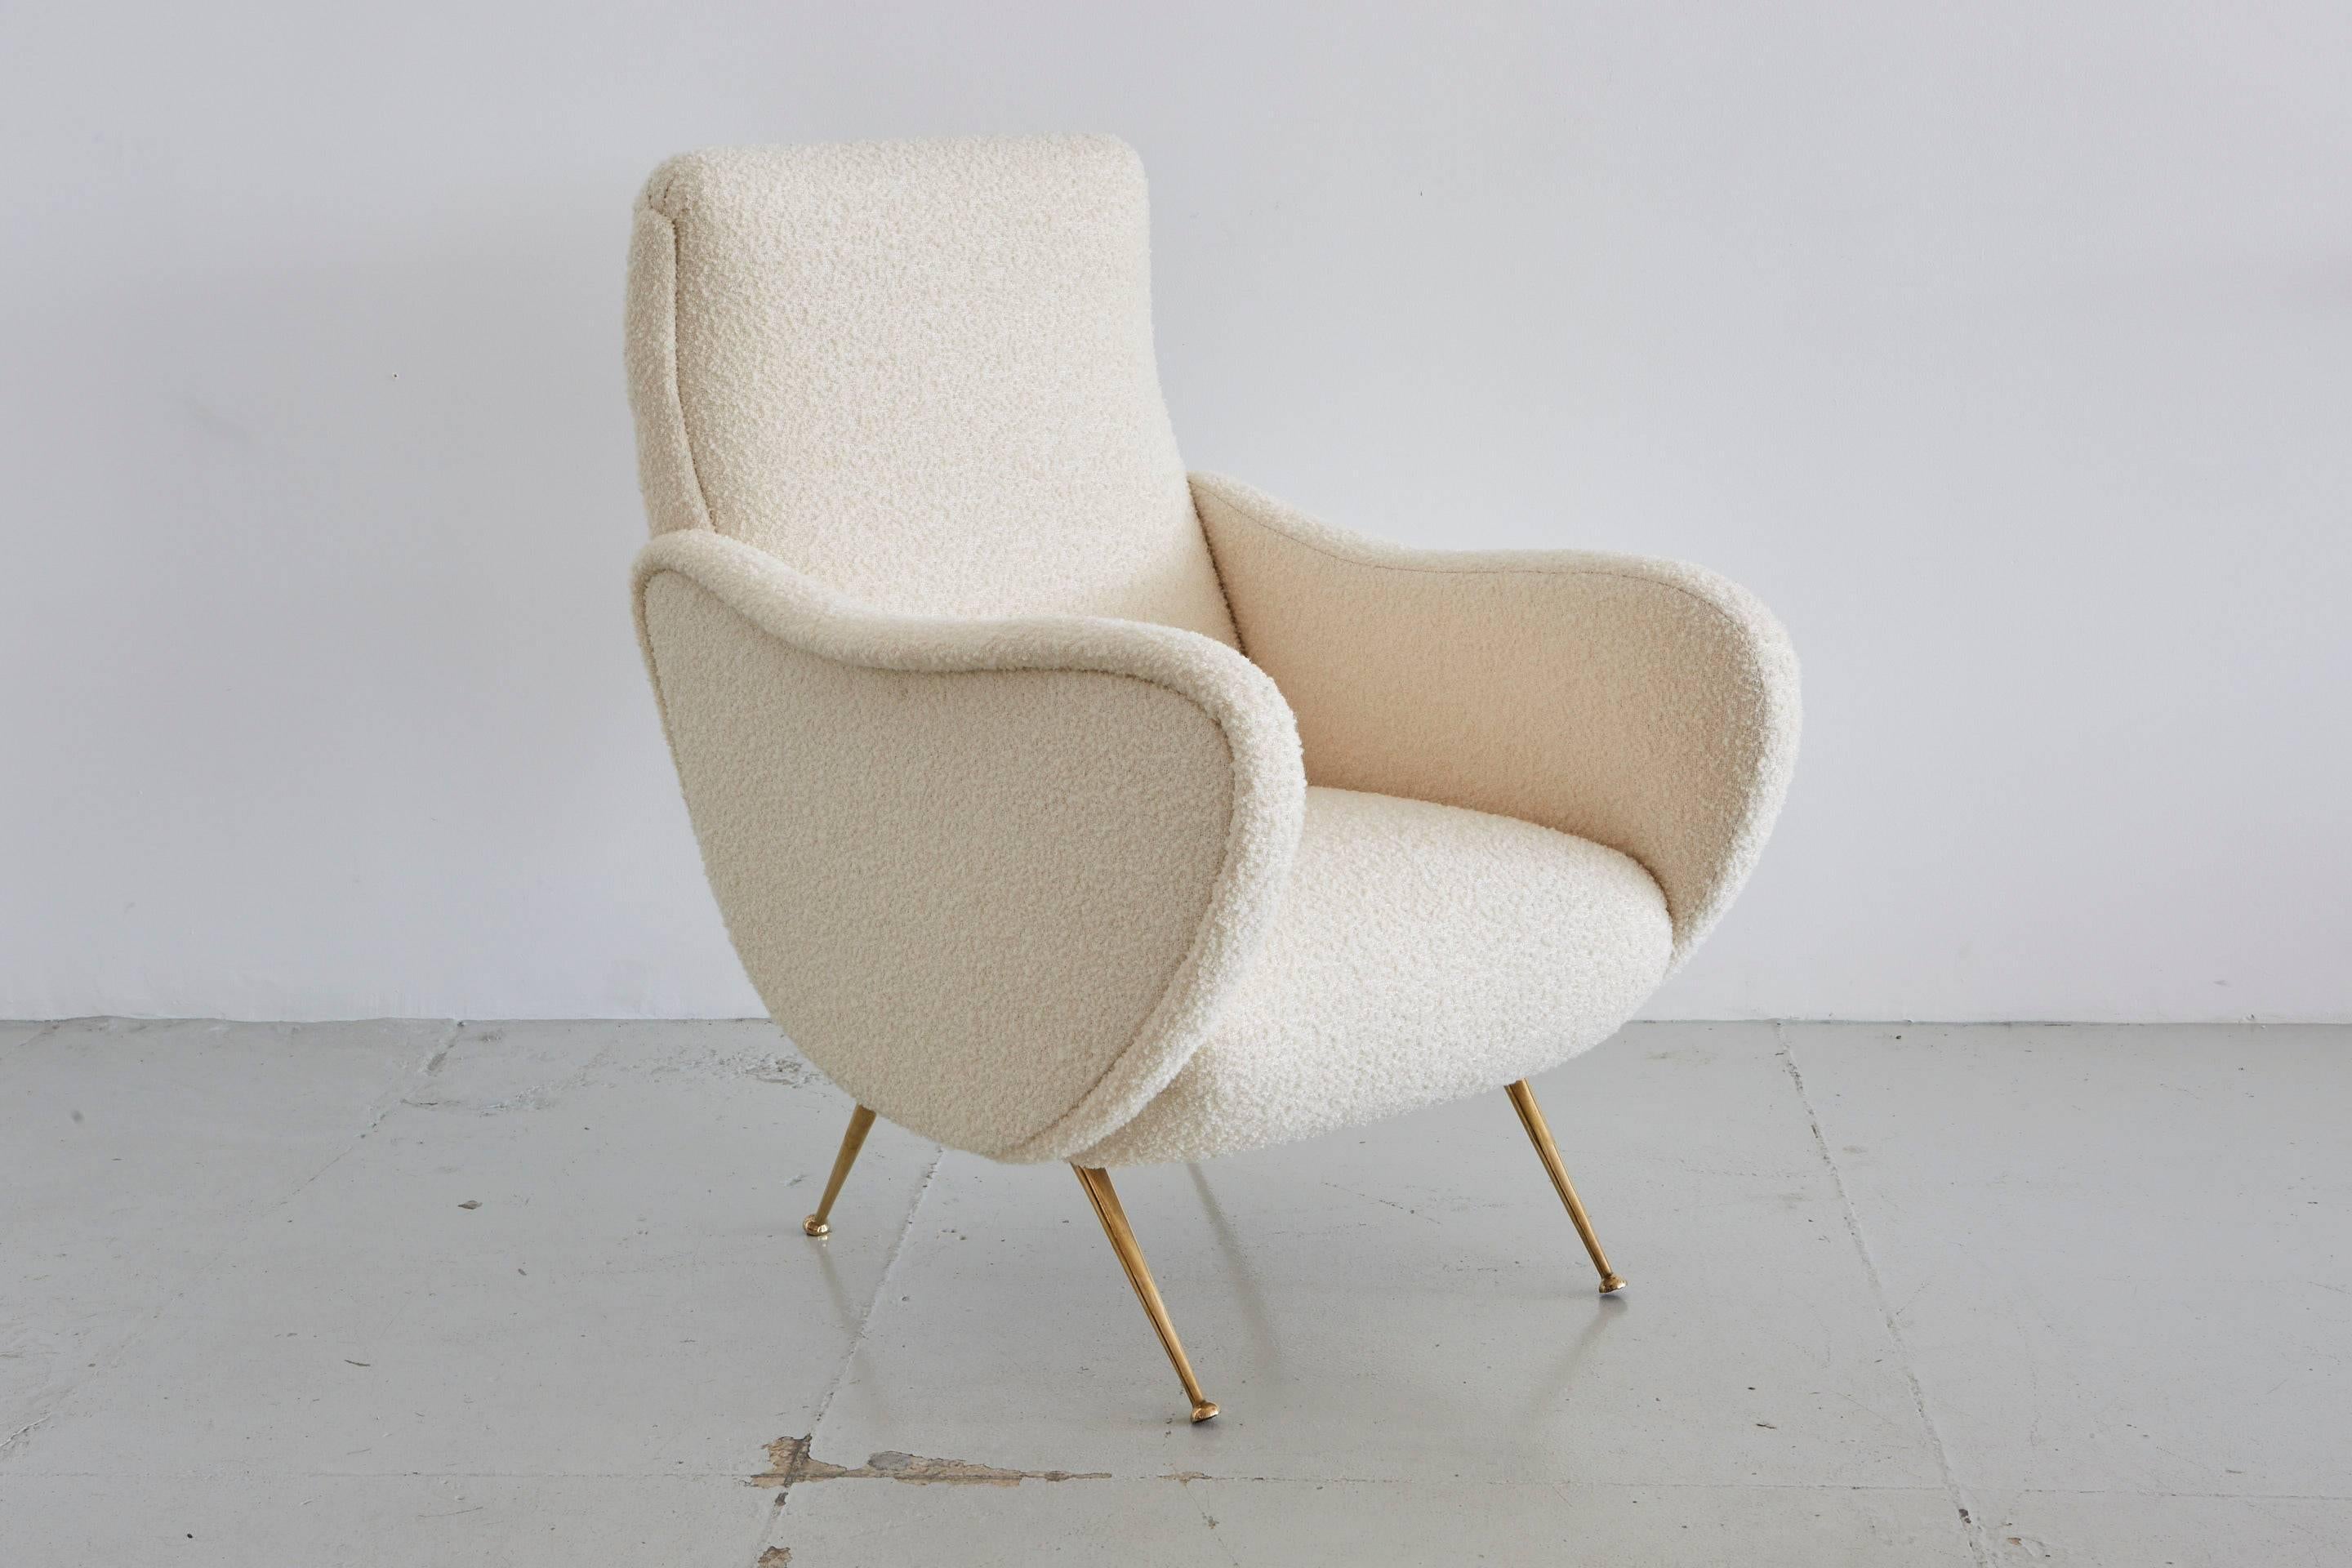 Marco Zanuso lady chair style with matching ottoman.
Reupholstered in creamy wool bouclé and newly polished brass legs.